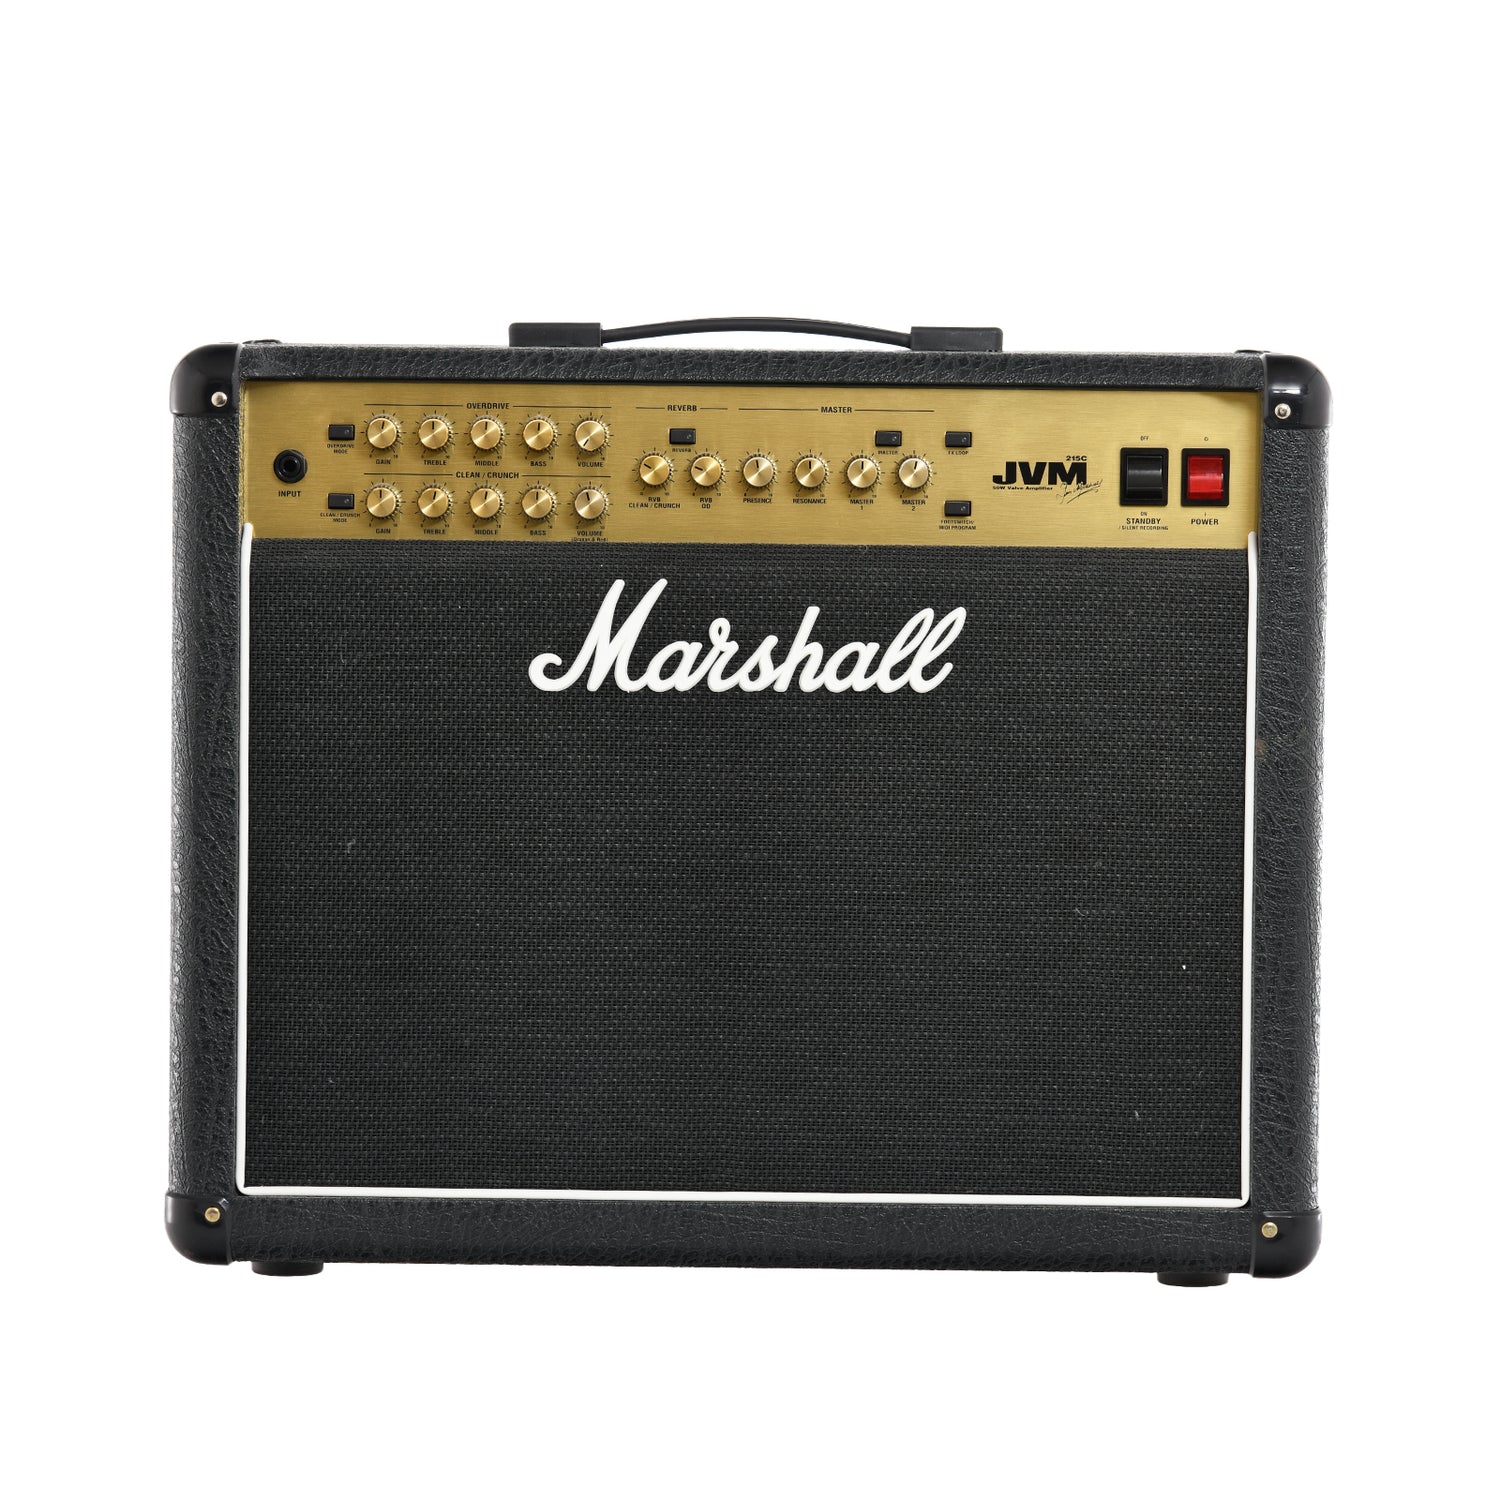 Front  of Marshall JVM-215C